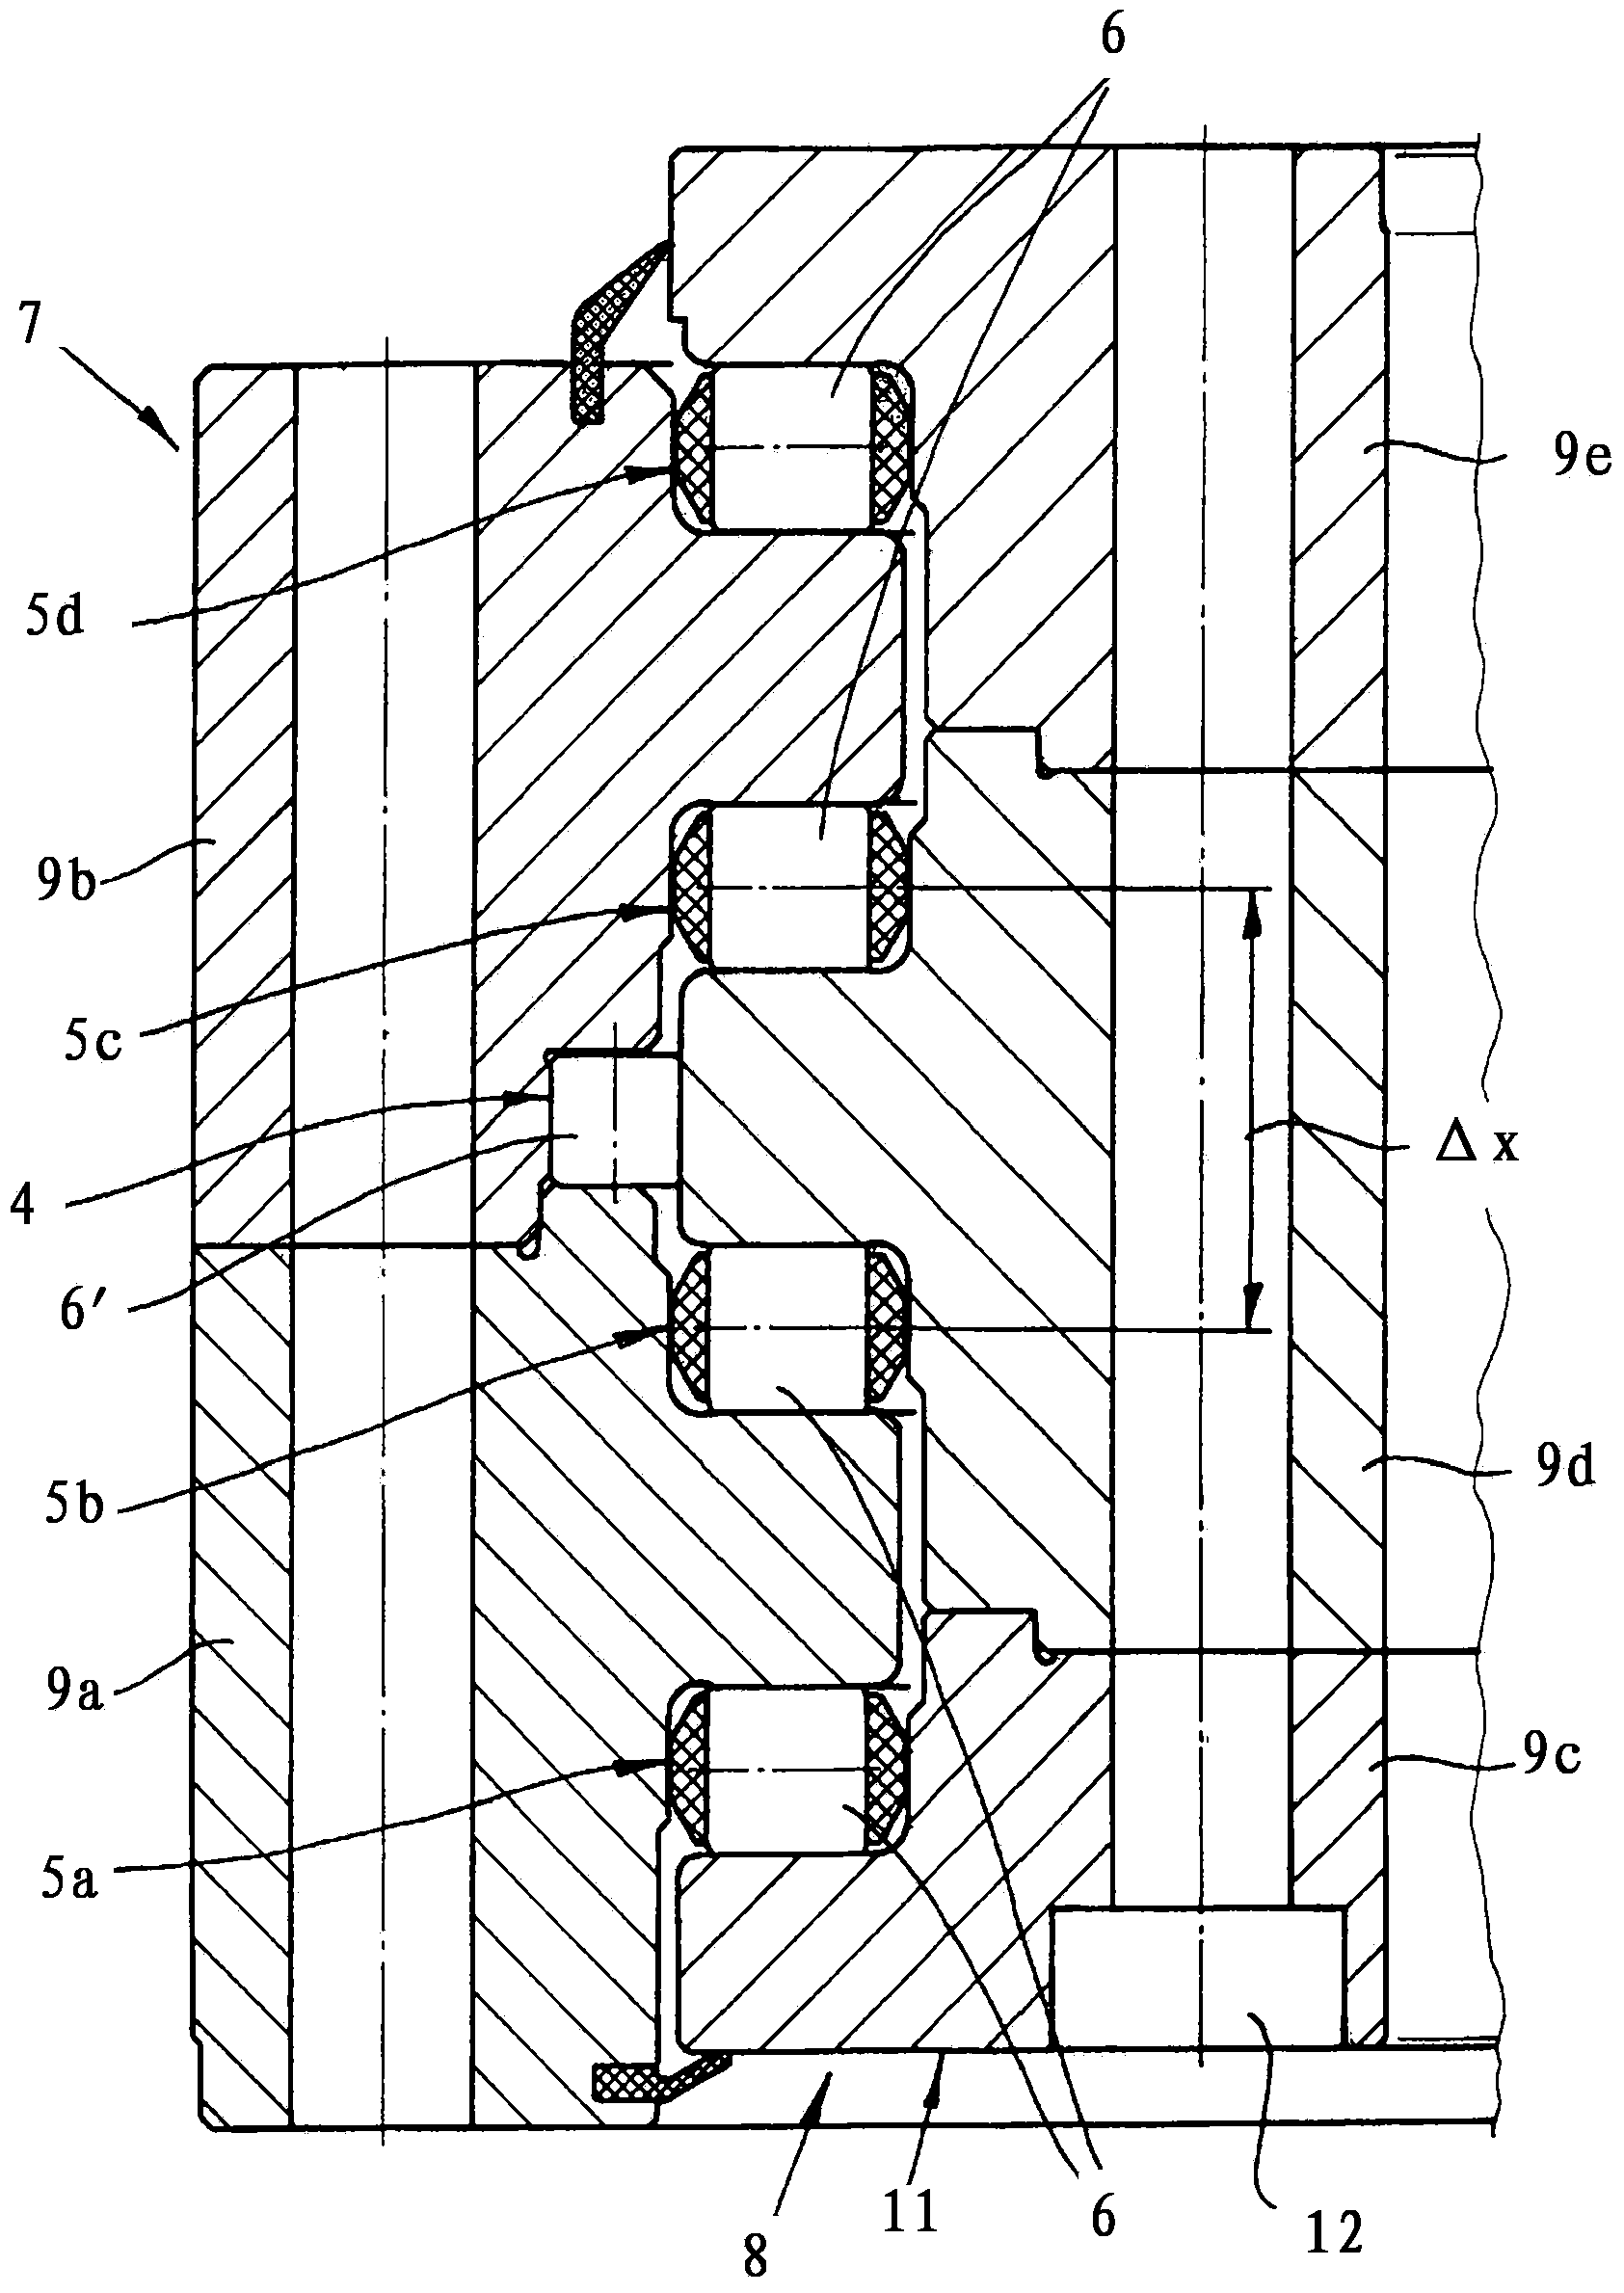 Axial-radial rolling contact bearing, in particular for supporting rotor blades on a wind turbine